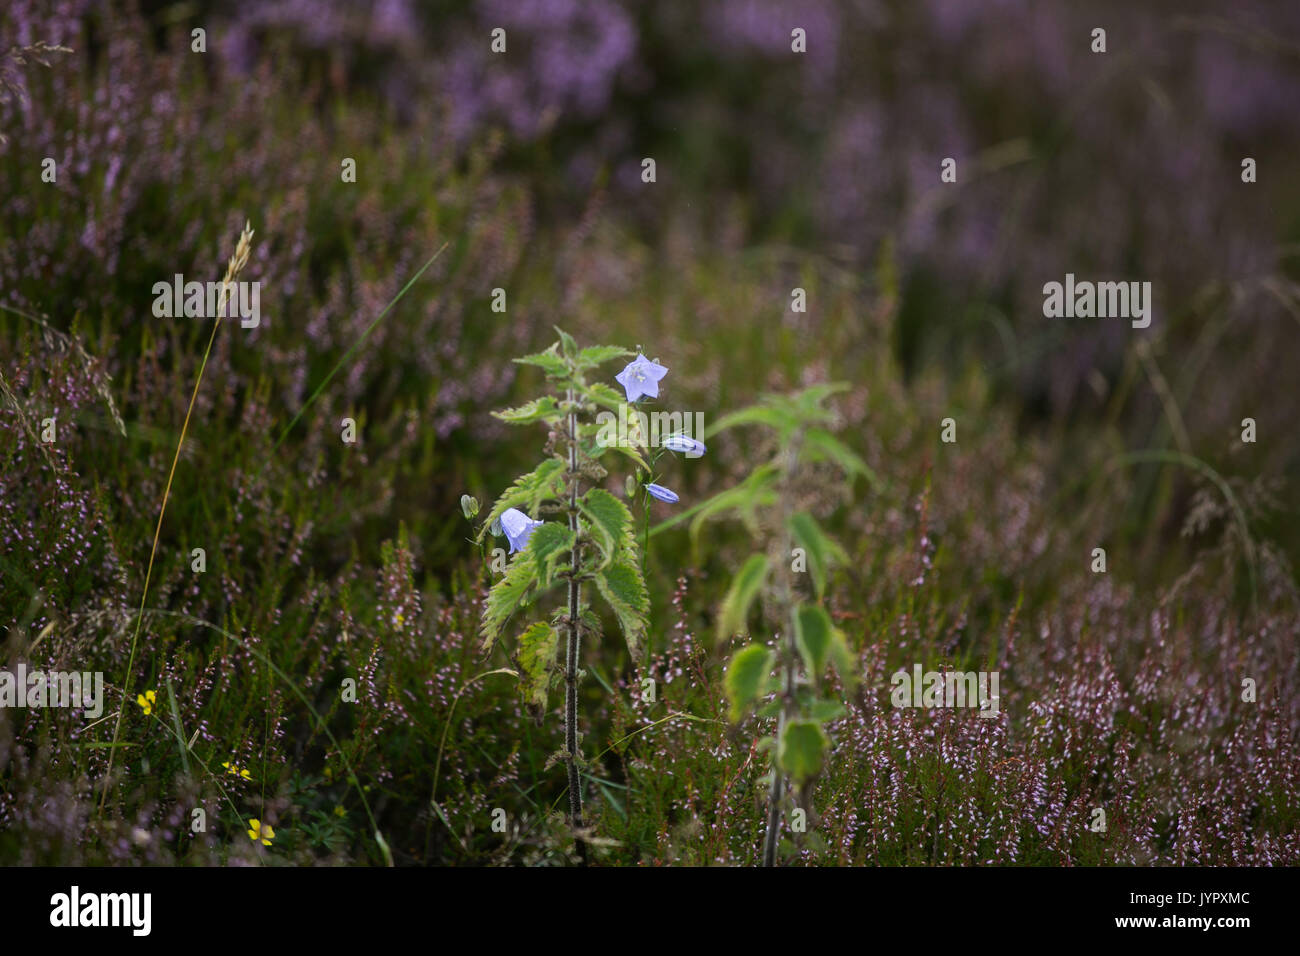 A marsh violet amongst heather on moorland in the Borders of Scotland. The hills are popular hunting ground for grouse. Stock Photo